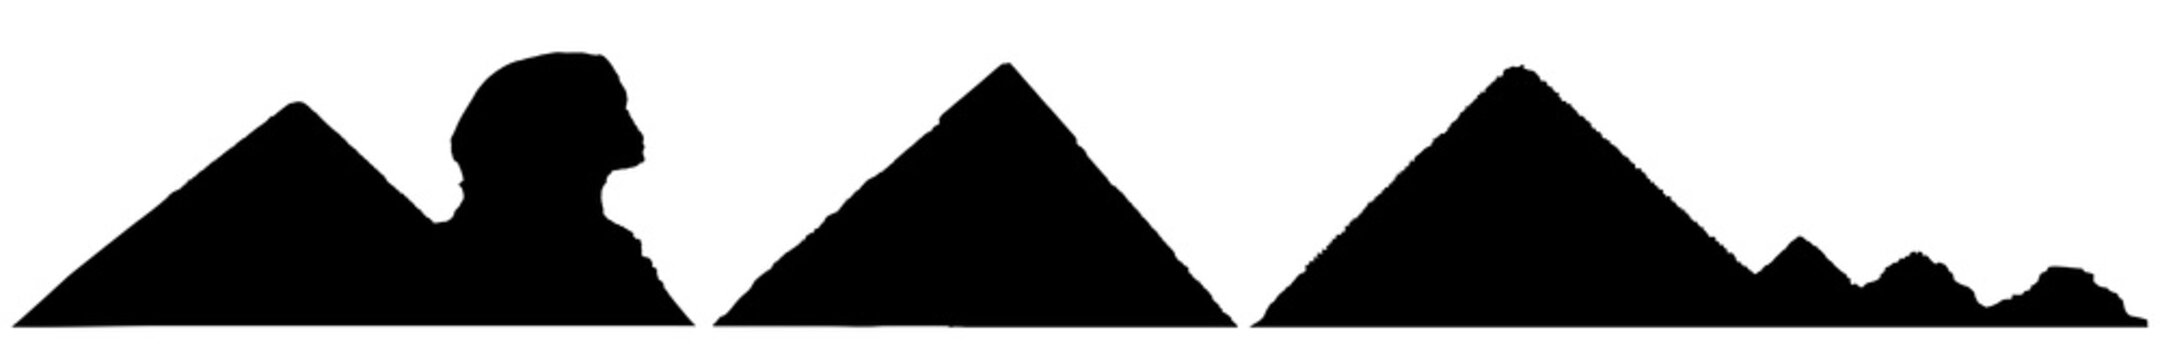 Silhouettes of pyramids and Sphinx, set of landmarks of Egypt. Vector illustration.